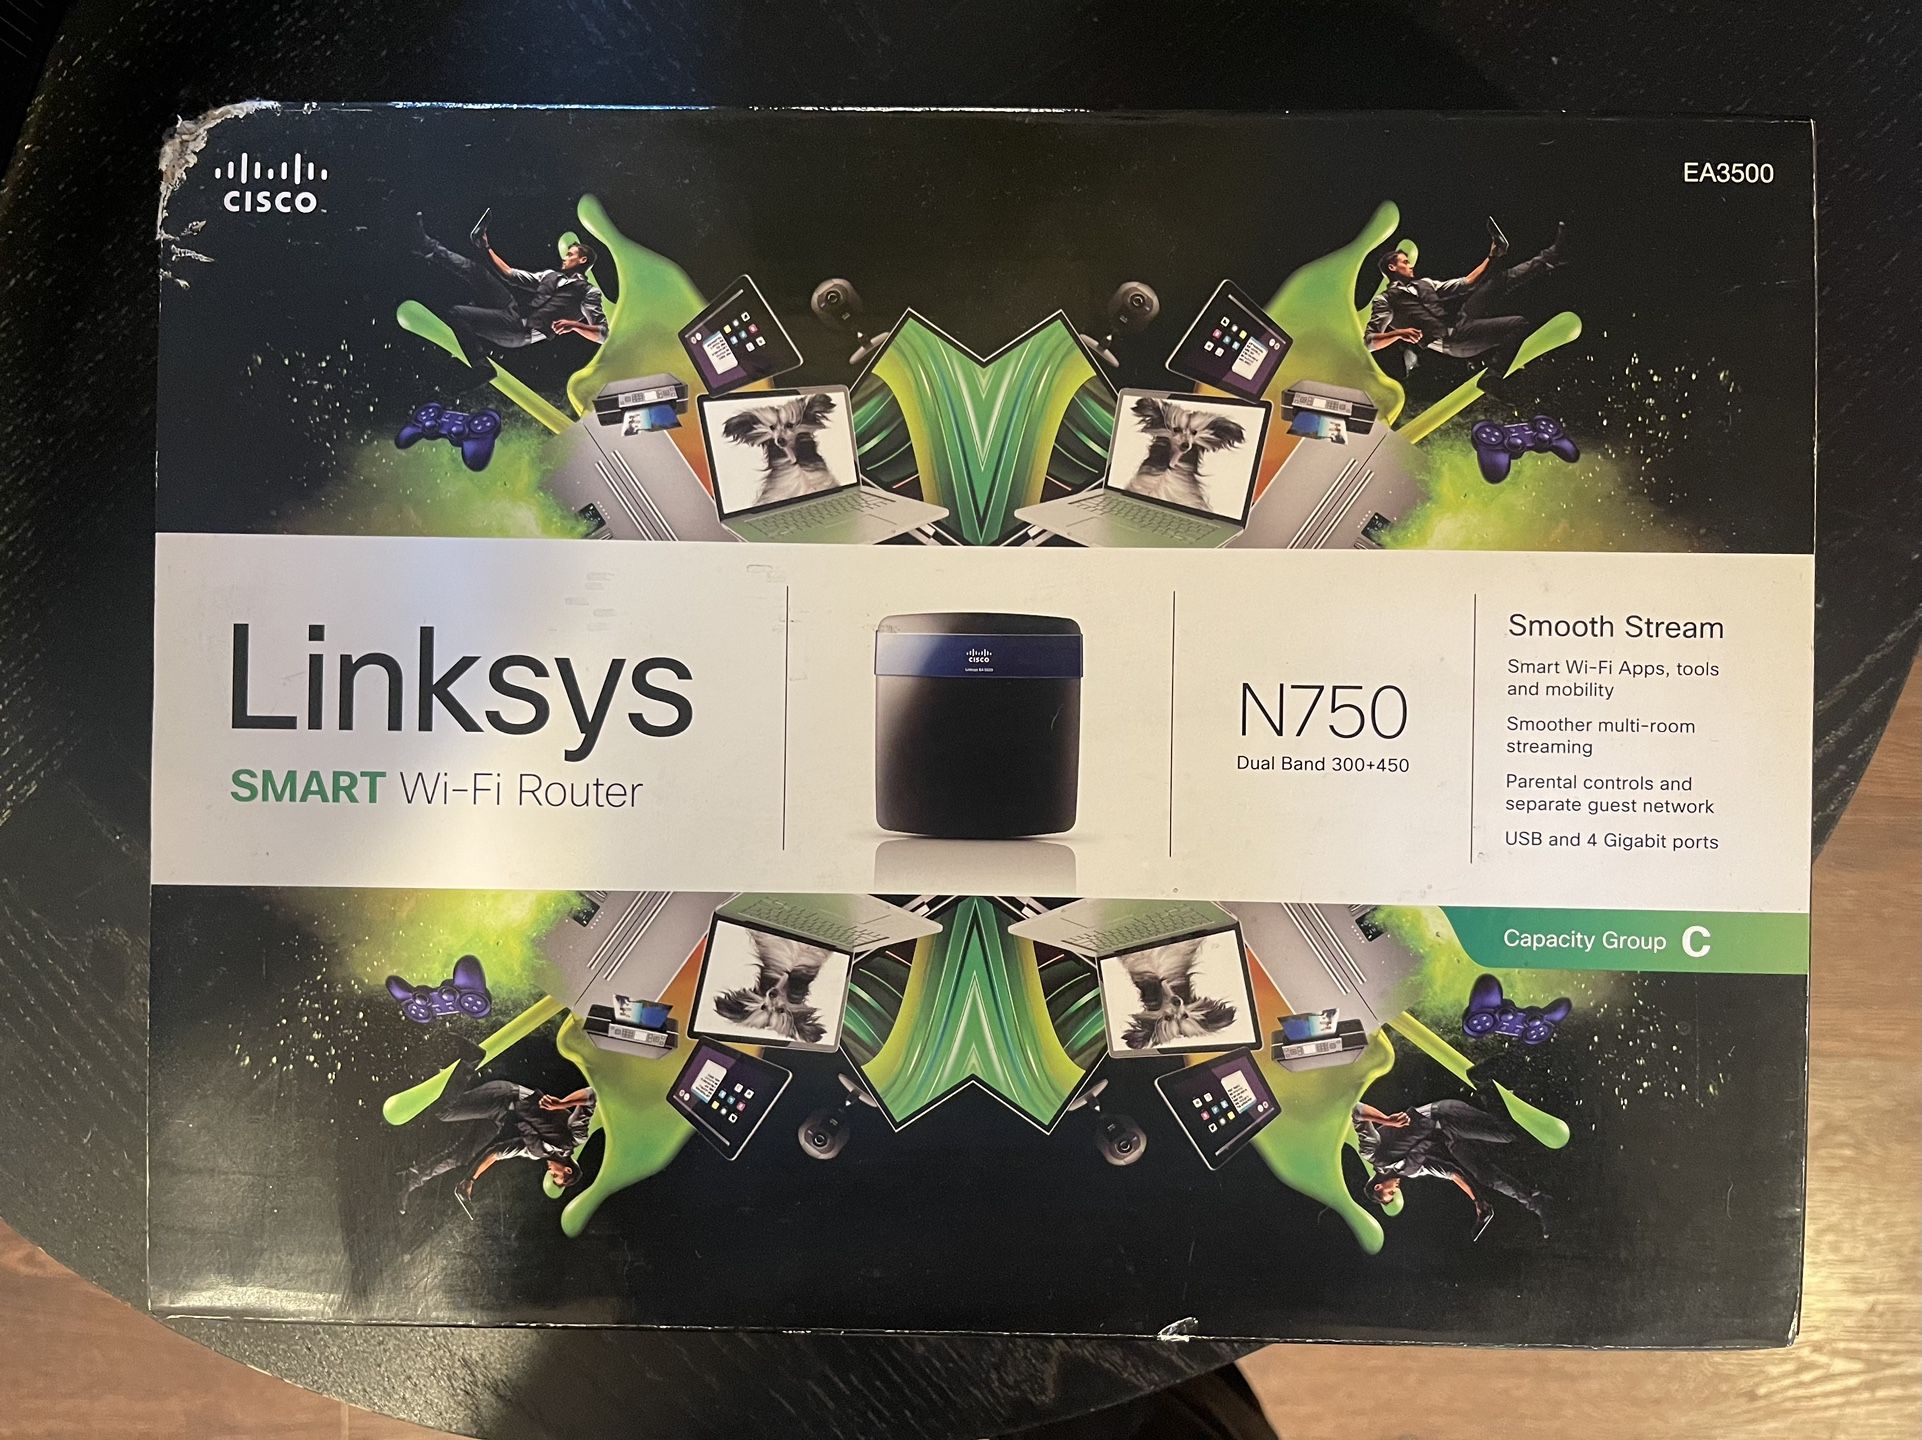 Linksys N750 WiFi Router